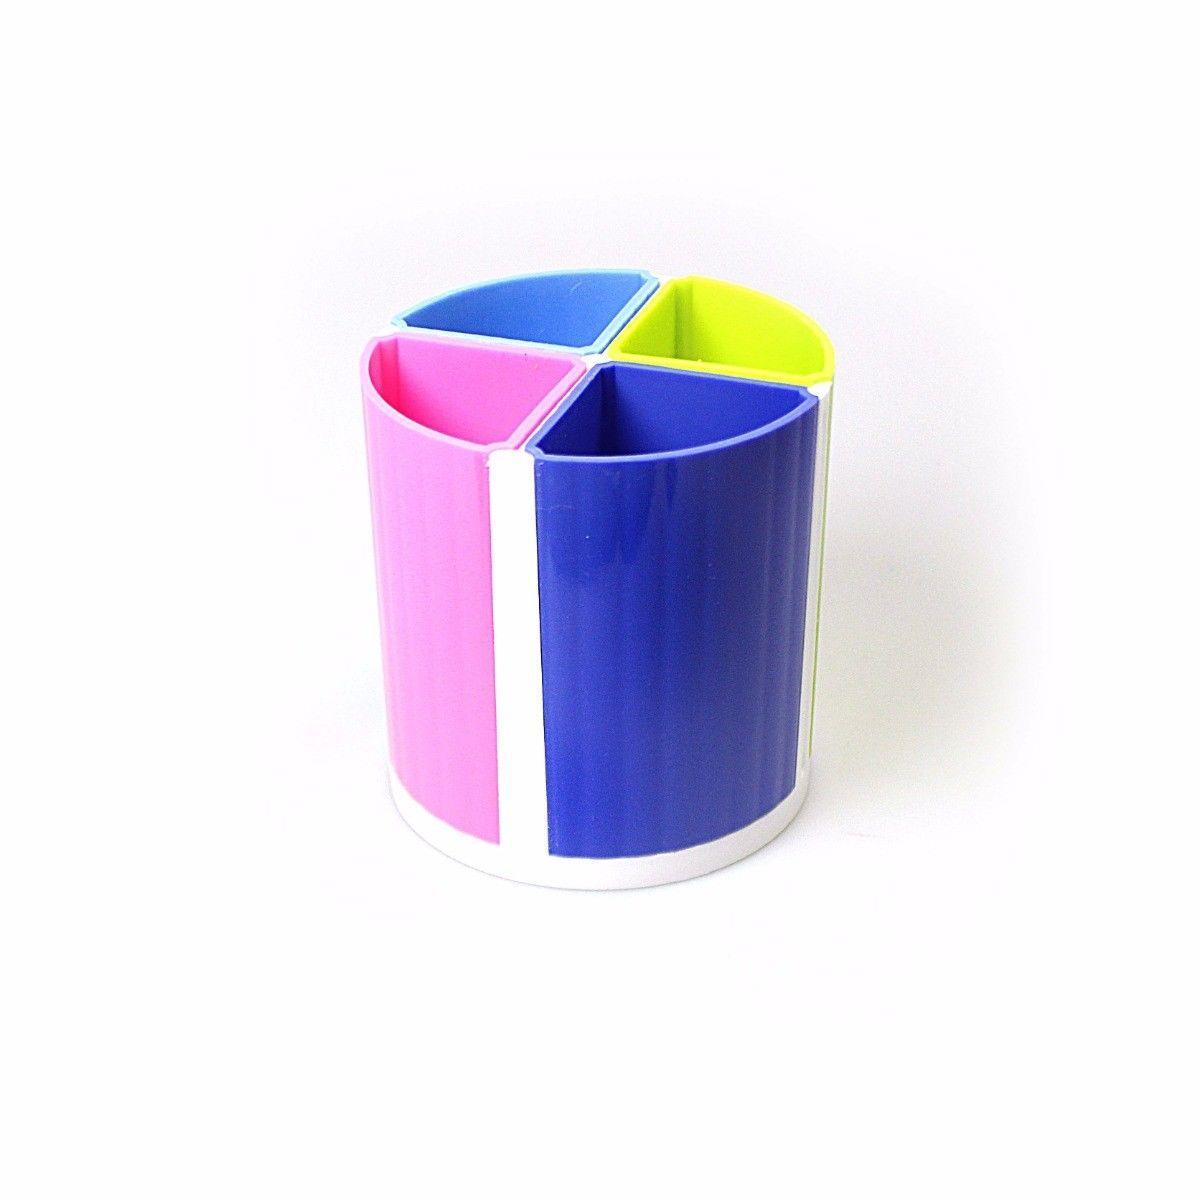 4 Compartment Office/Home Stationery Pen Stand Multi Colour 4058 (Parcel Rate)